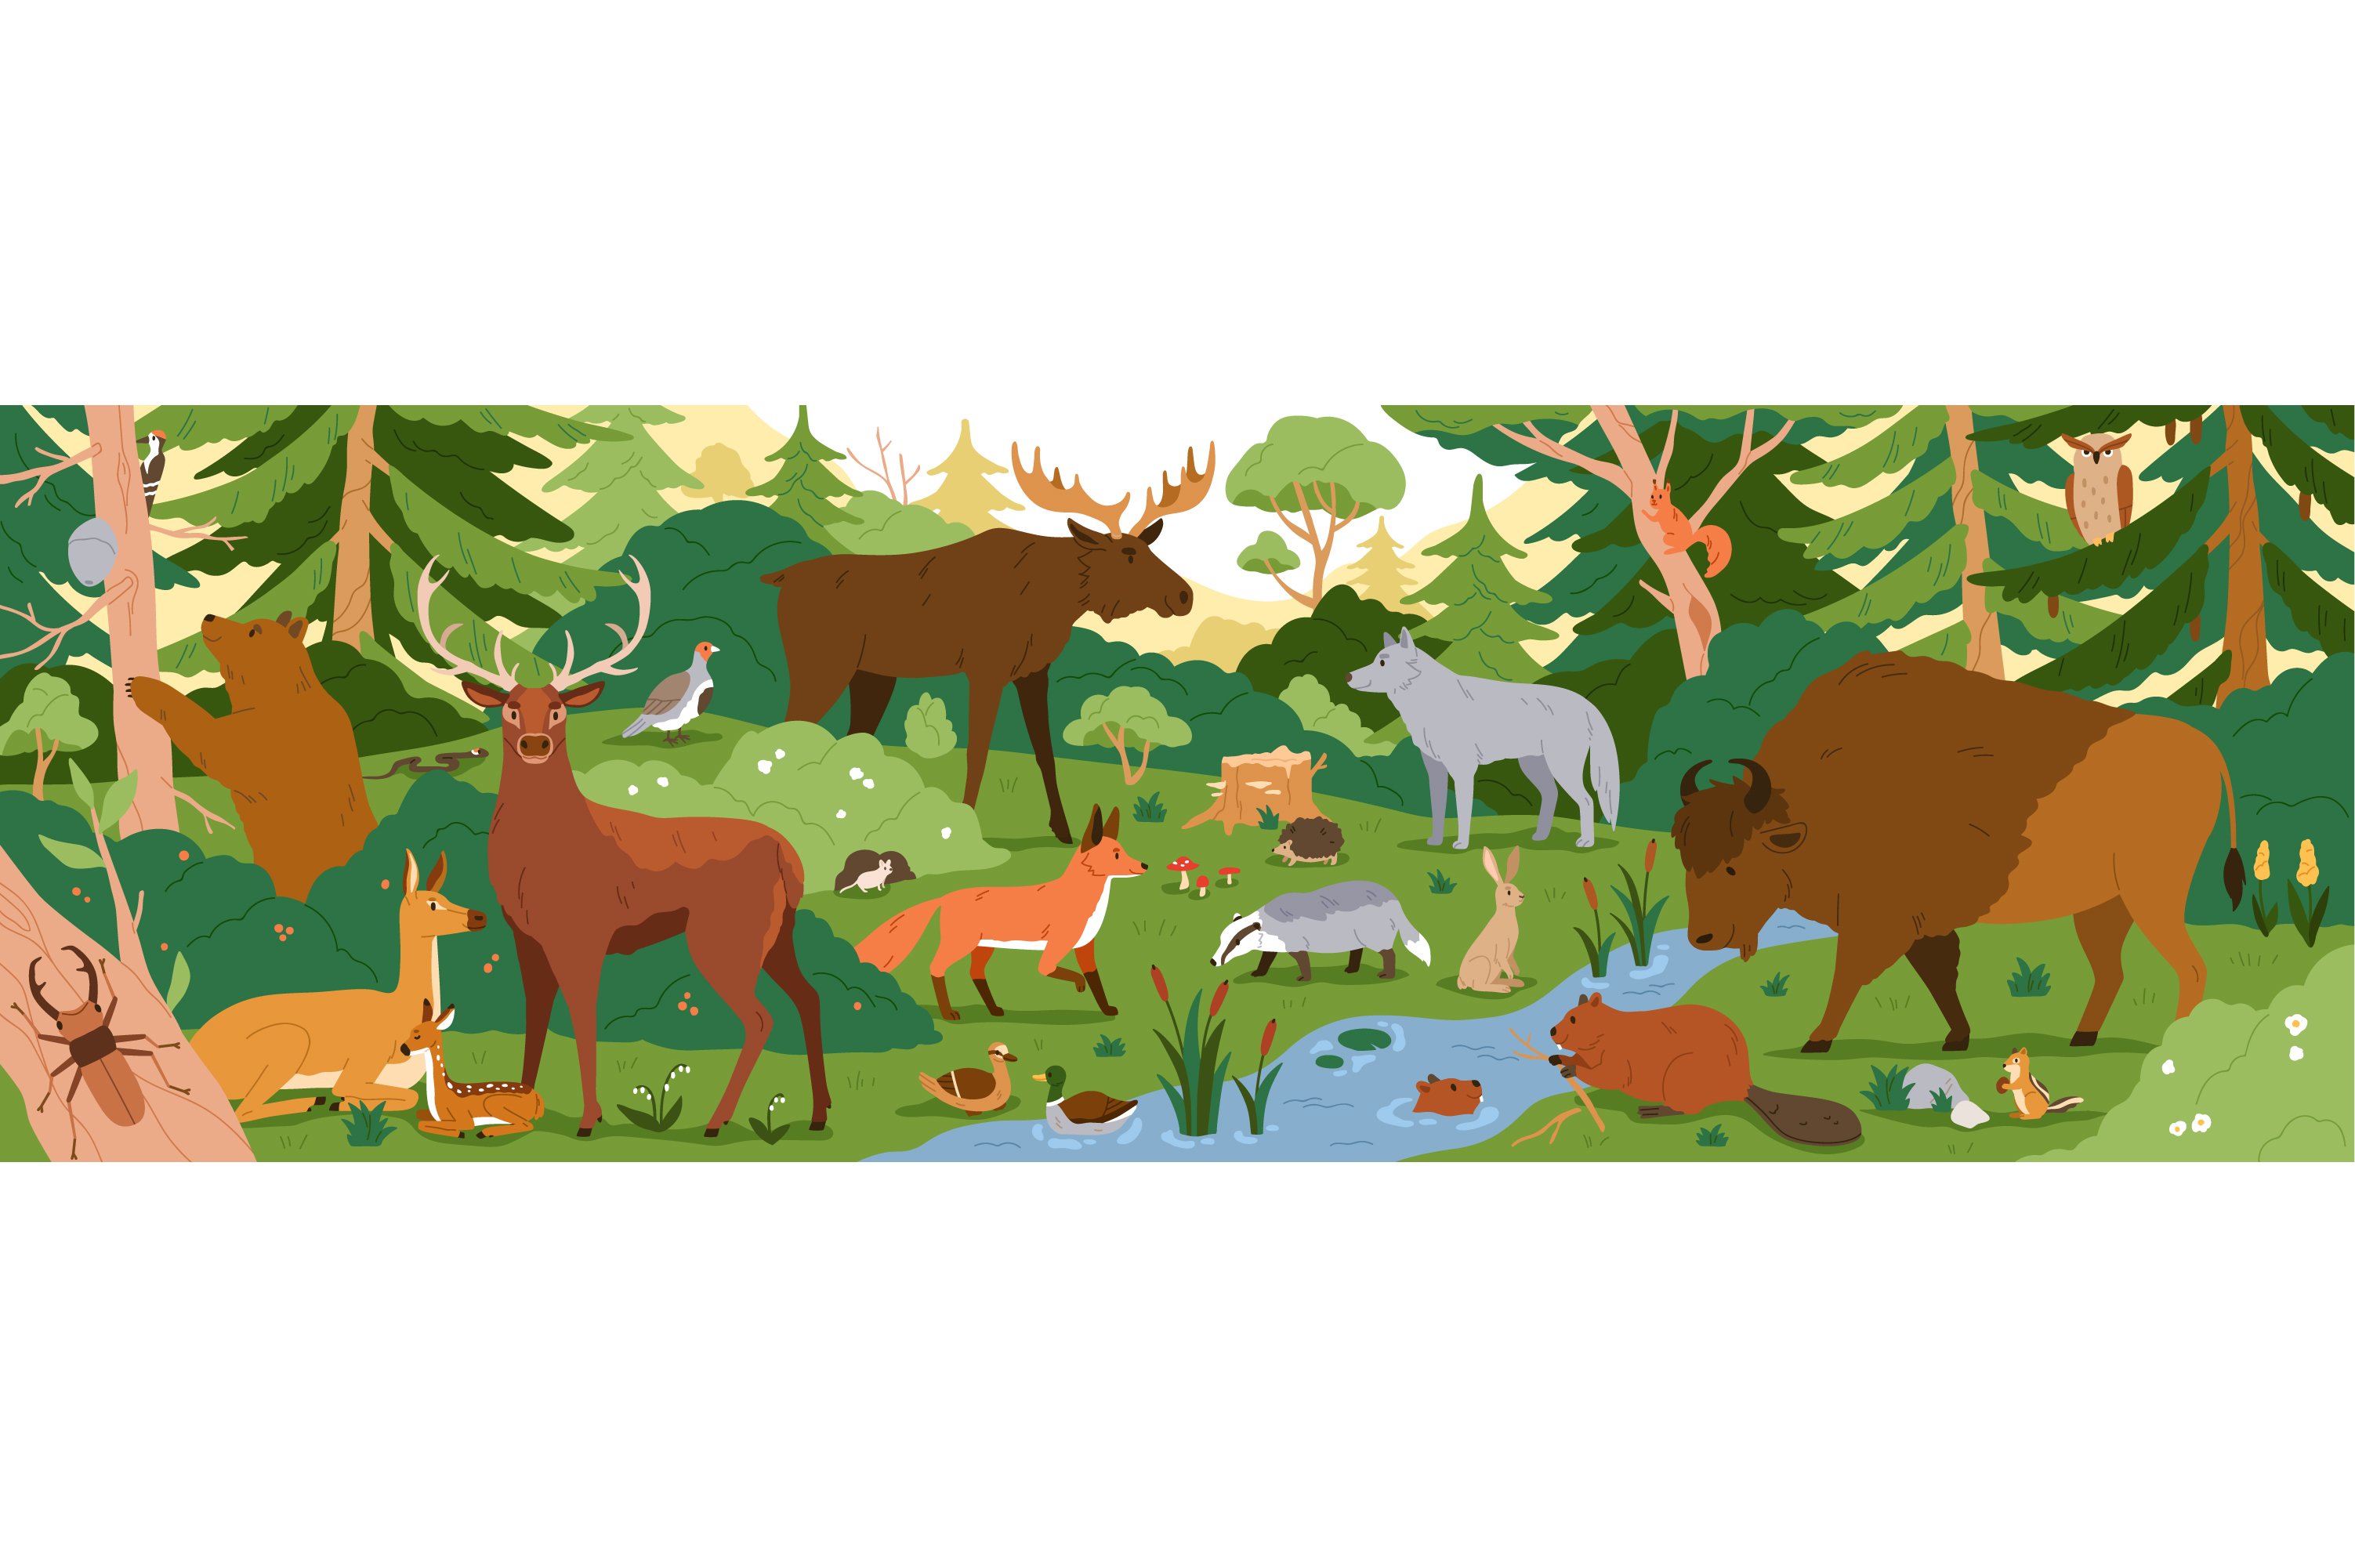 Forest animals in wild nature cover image.